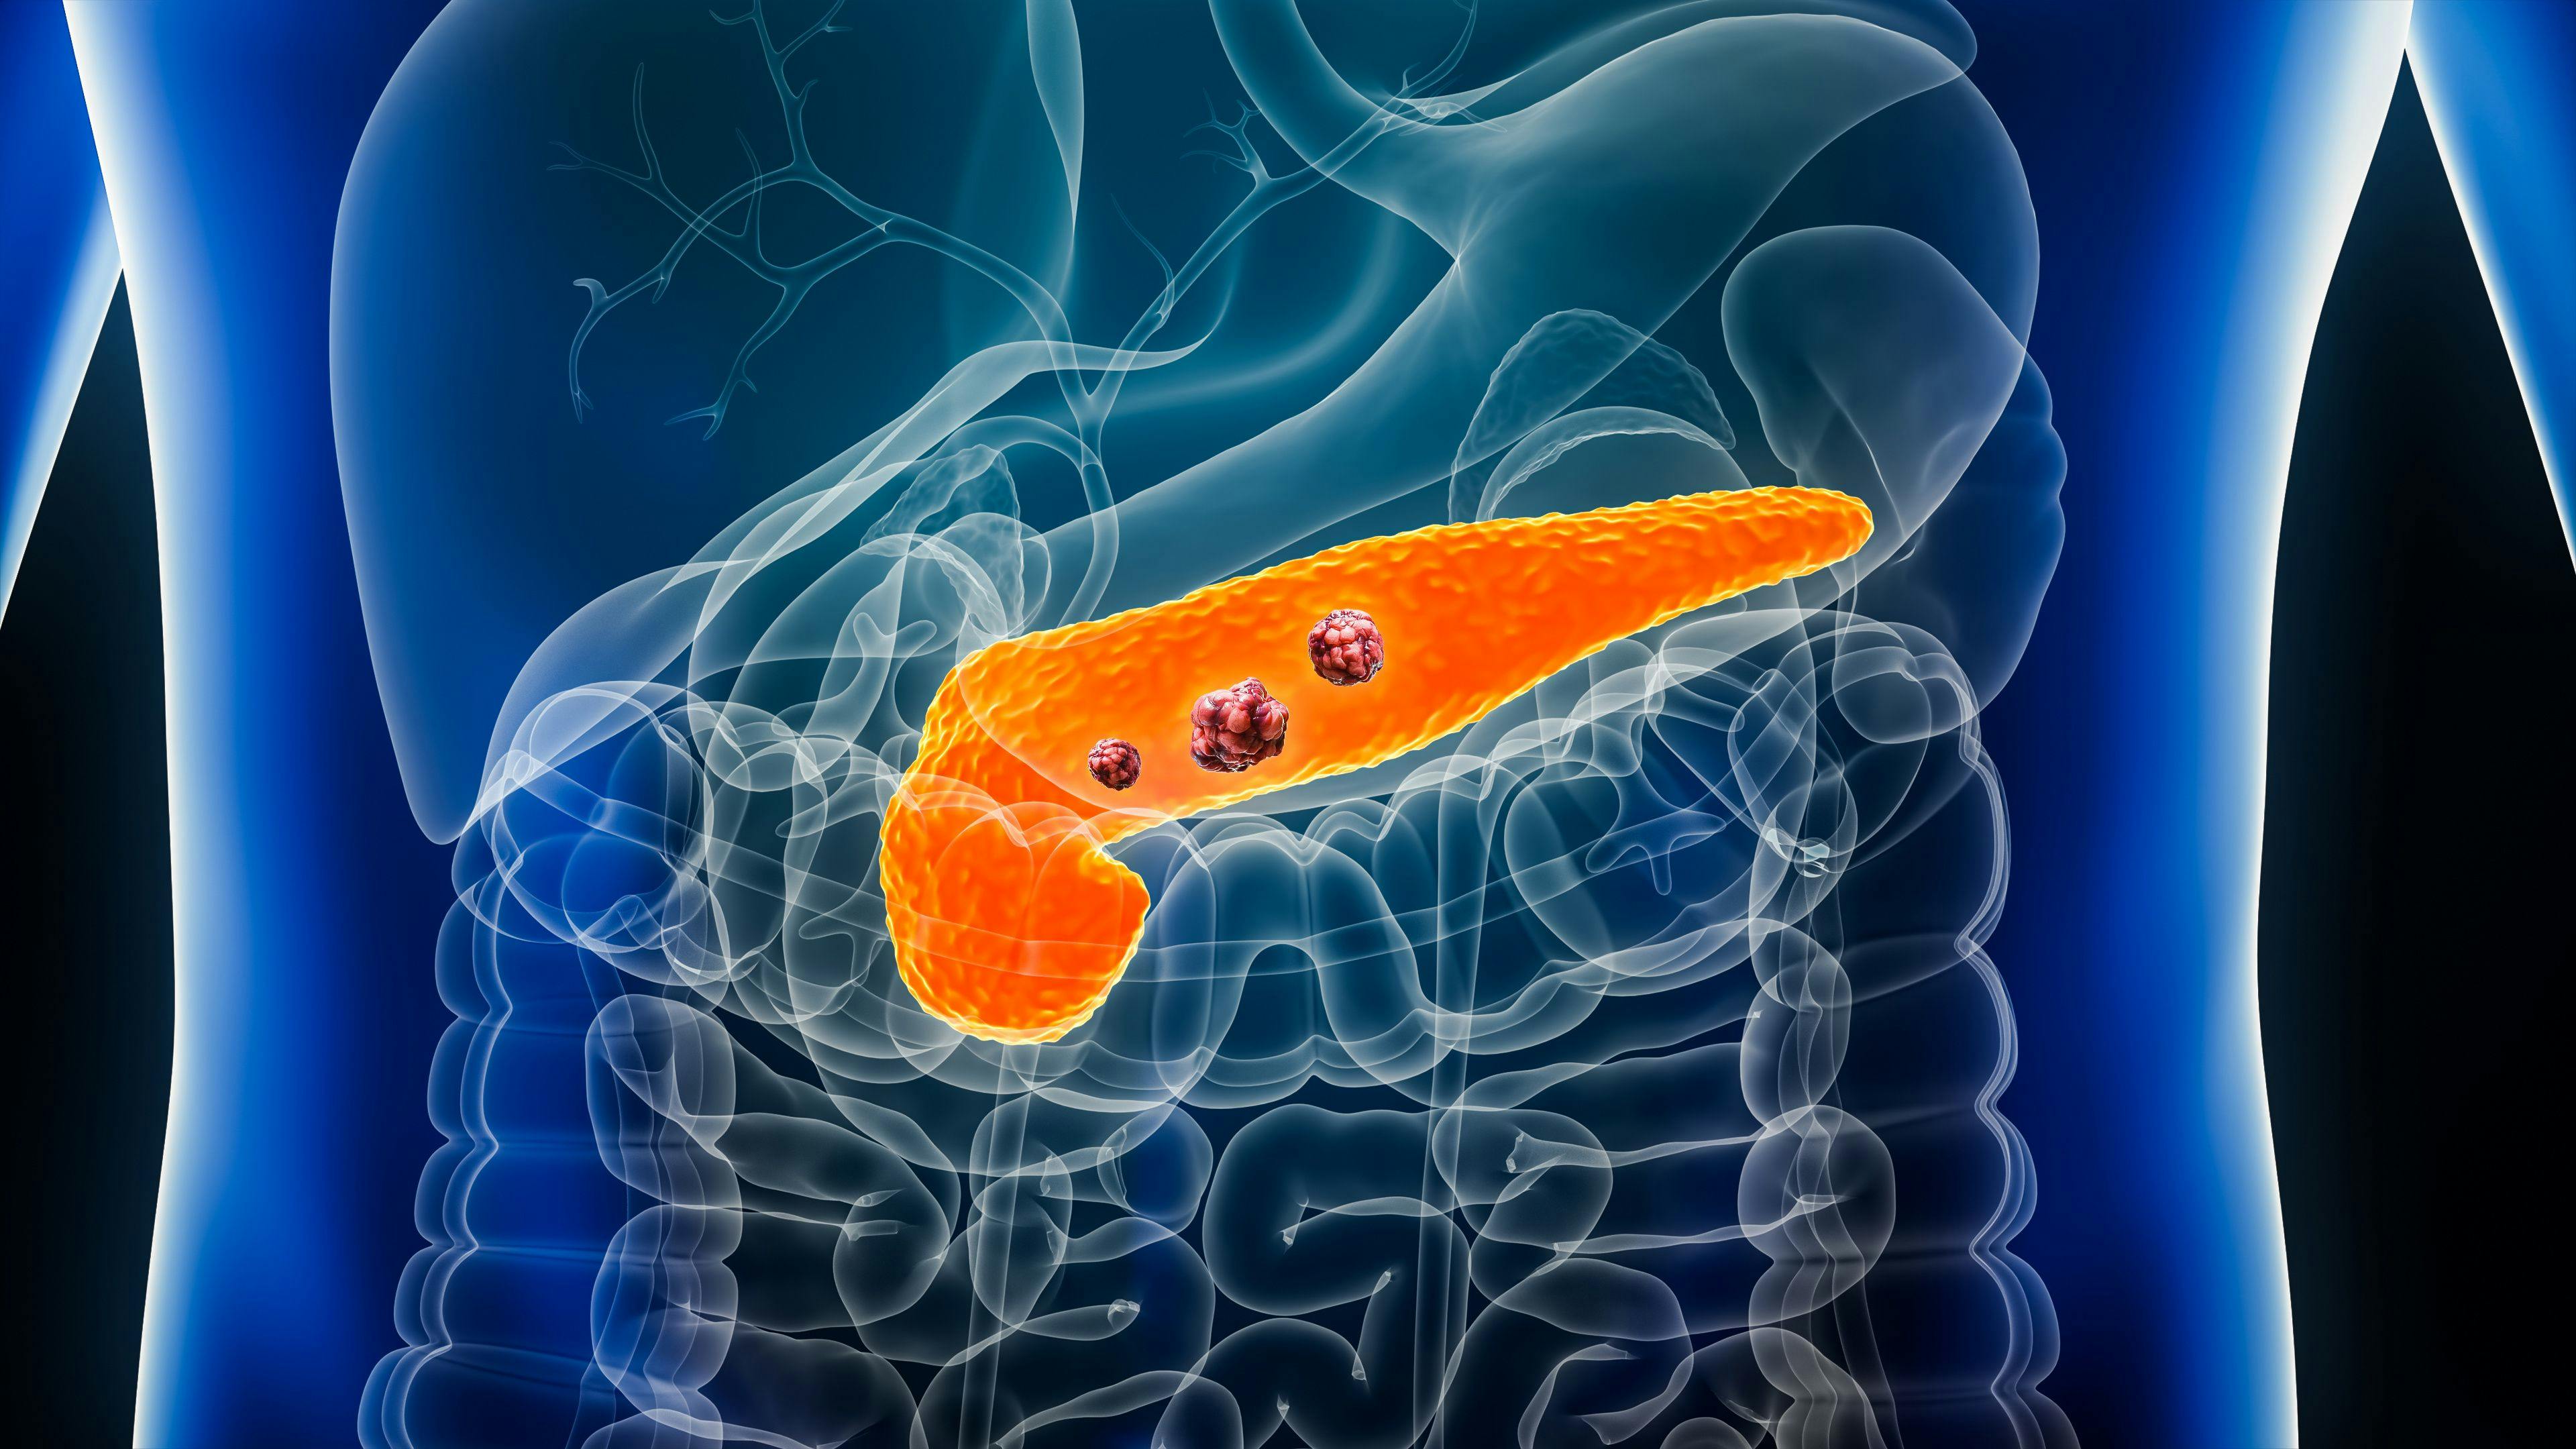 Image credit: Matthieu | stock.adobe.com. Pancreas or pancreatic cancer with organs and tumors or cancerous cells 3D rendering illustration with male body. Anatomy, oncology, disease, medical, biology, science, healthcare concepts